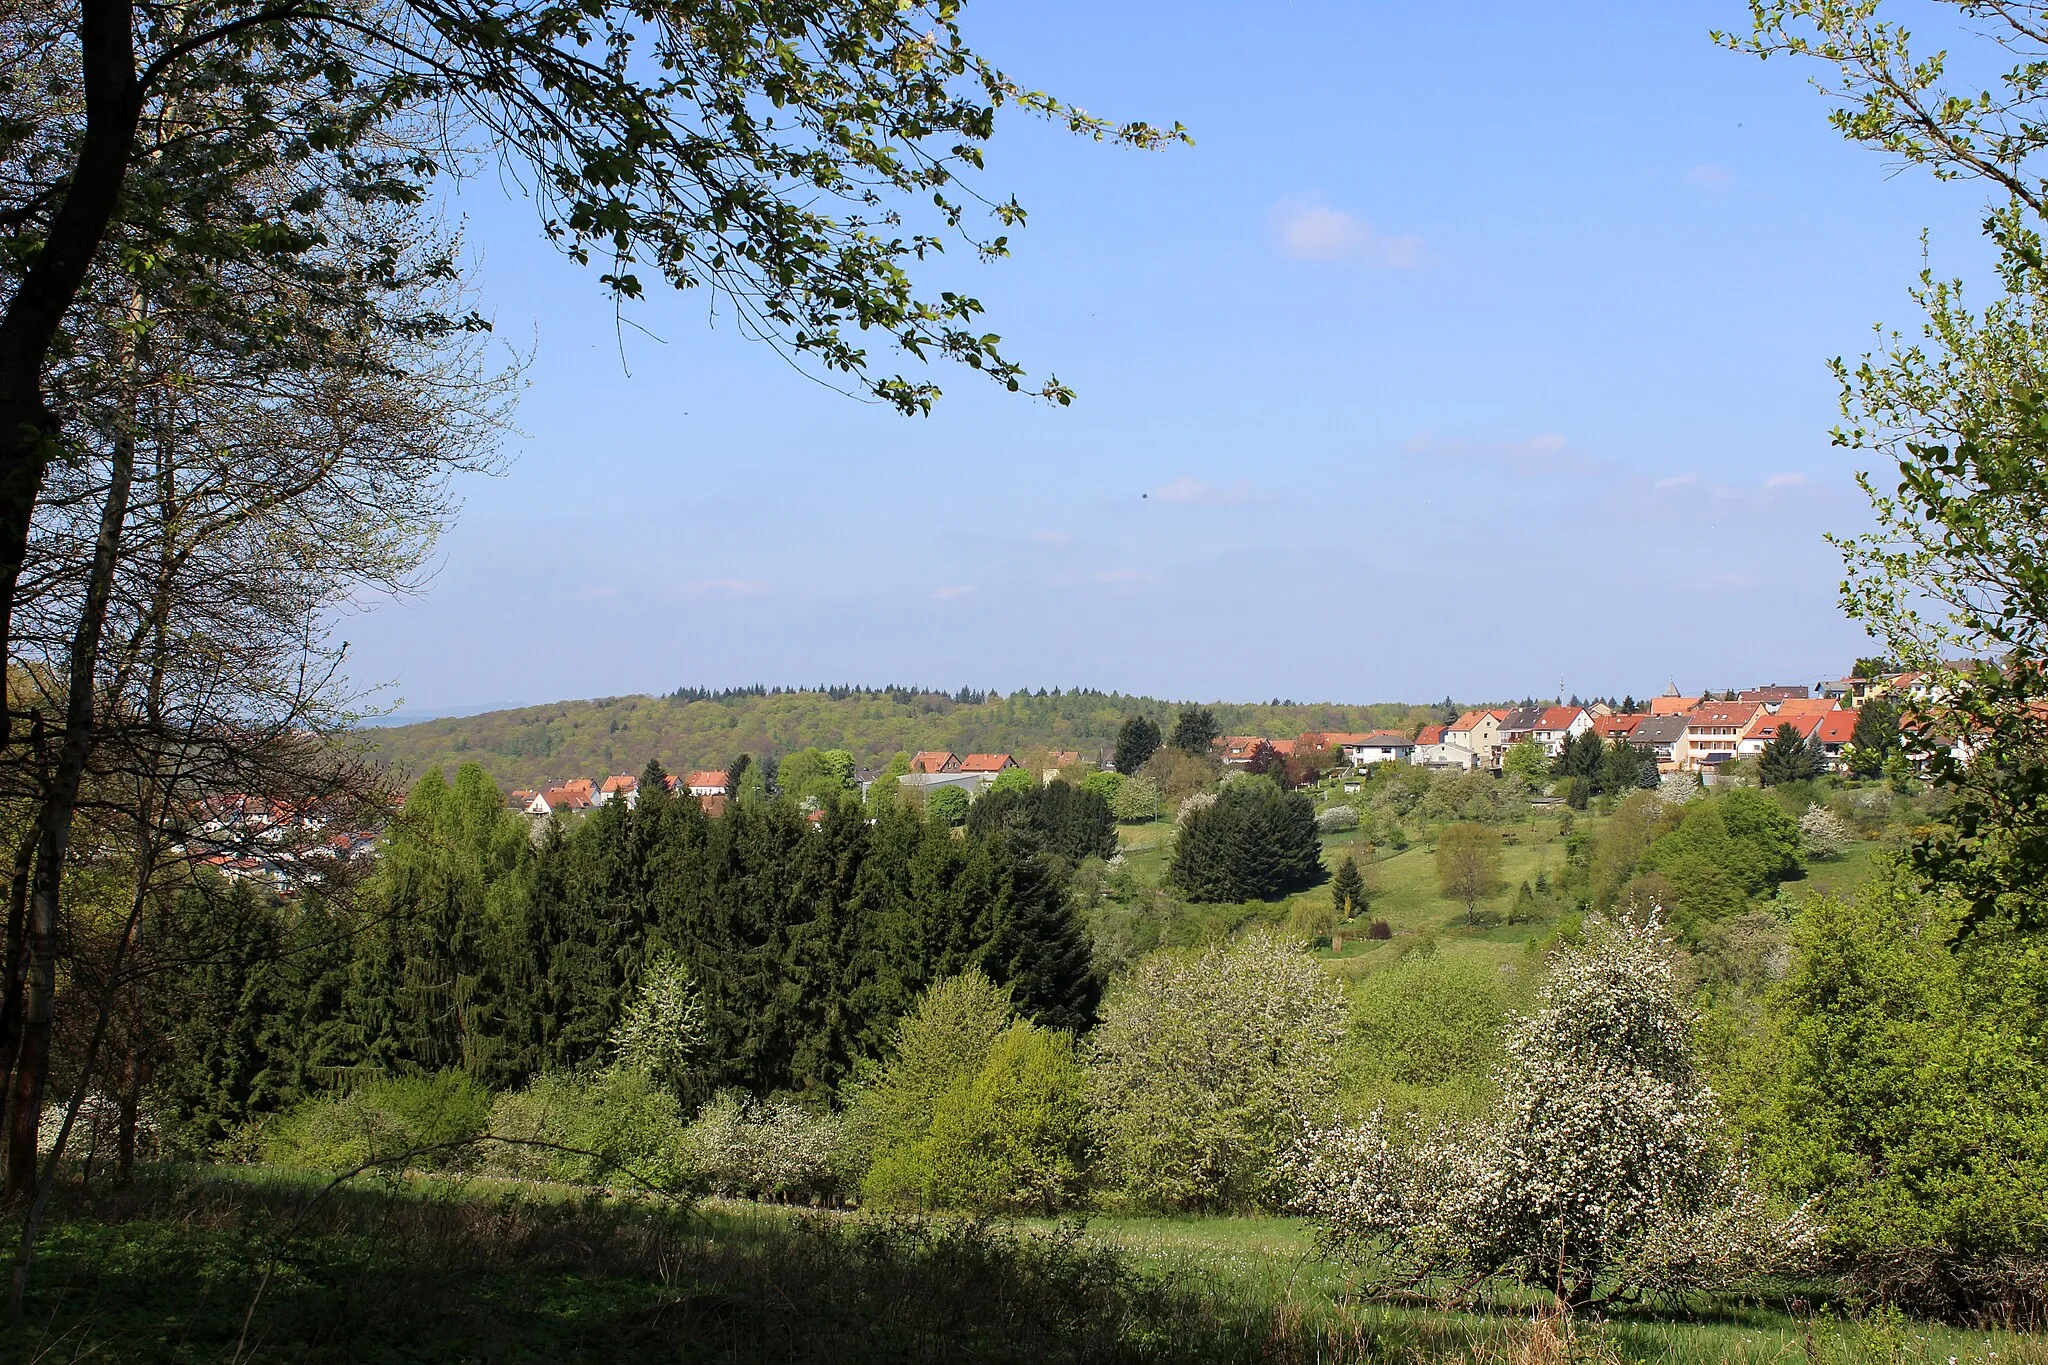 Photo showing: View of Münchwies, a district of Neunkirchen, Saarland